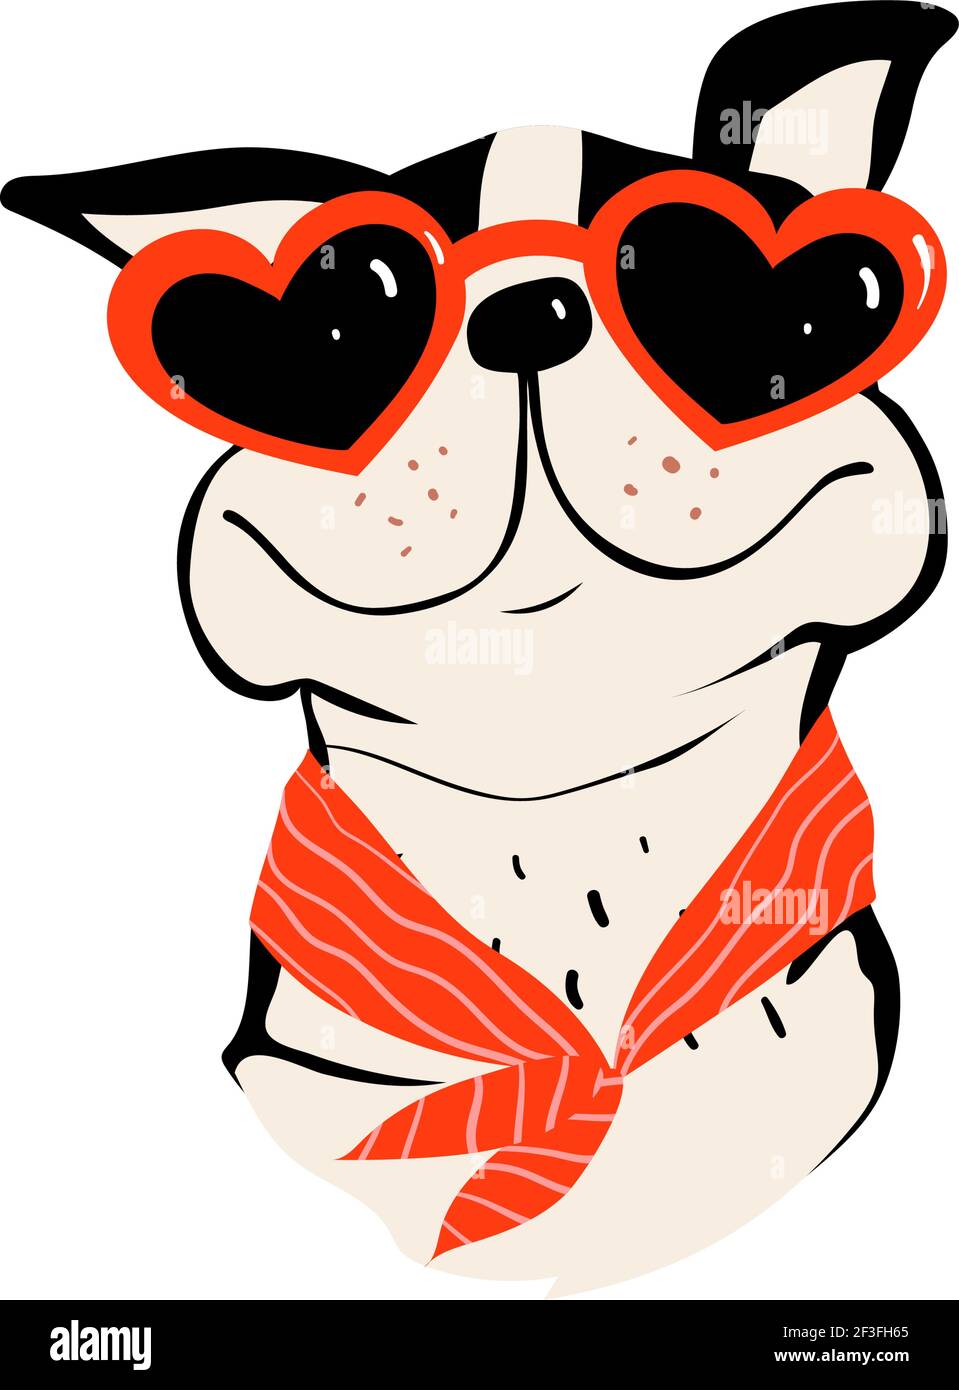 Dog Puppy with Sunglasses Icon Smiling Cartoon Stock Vector